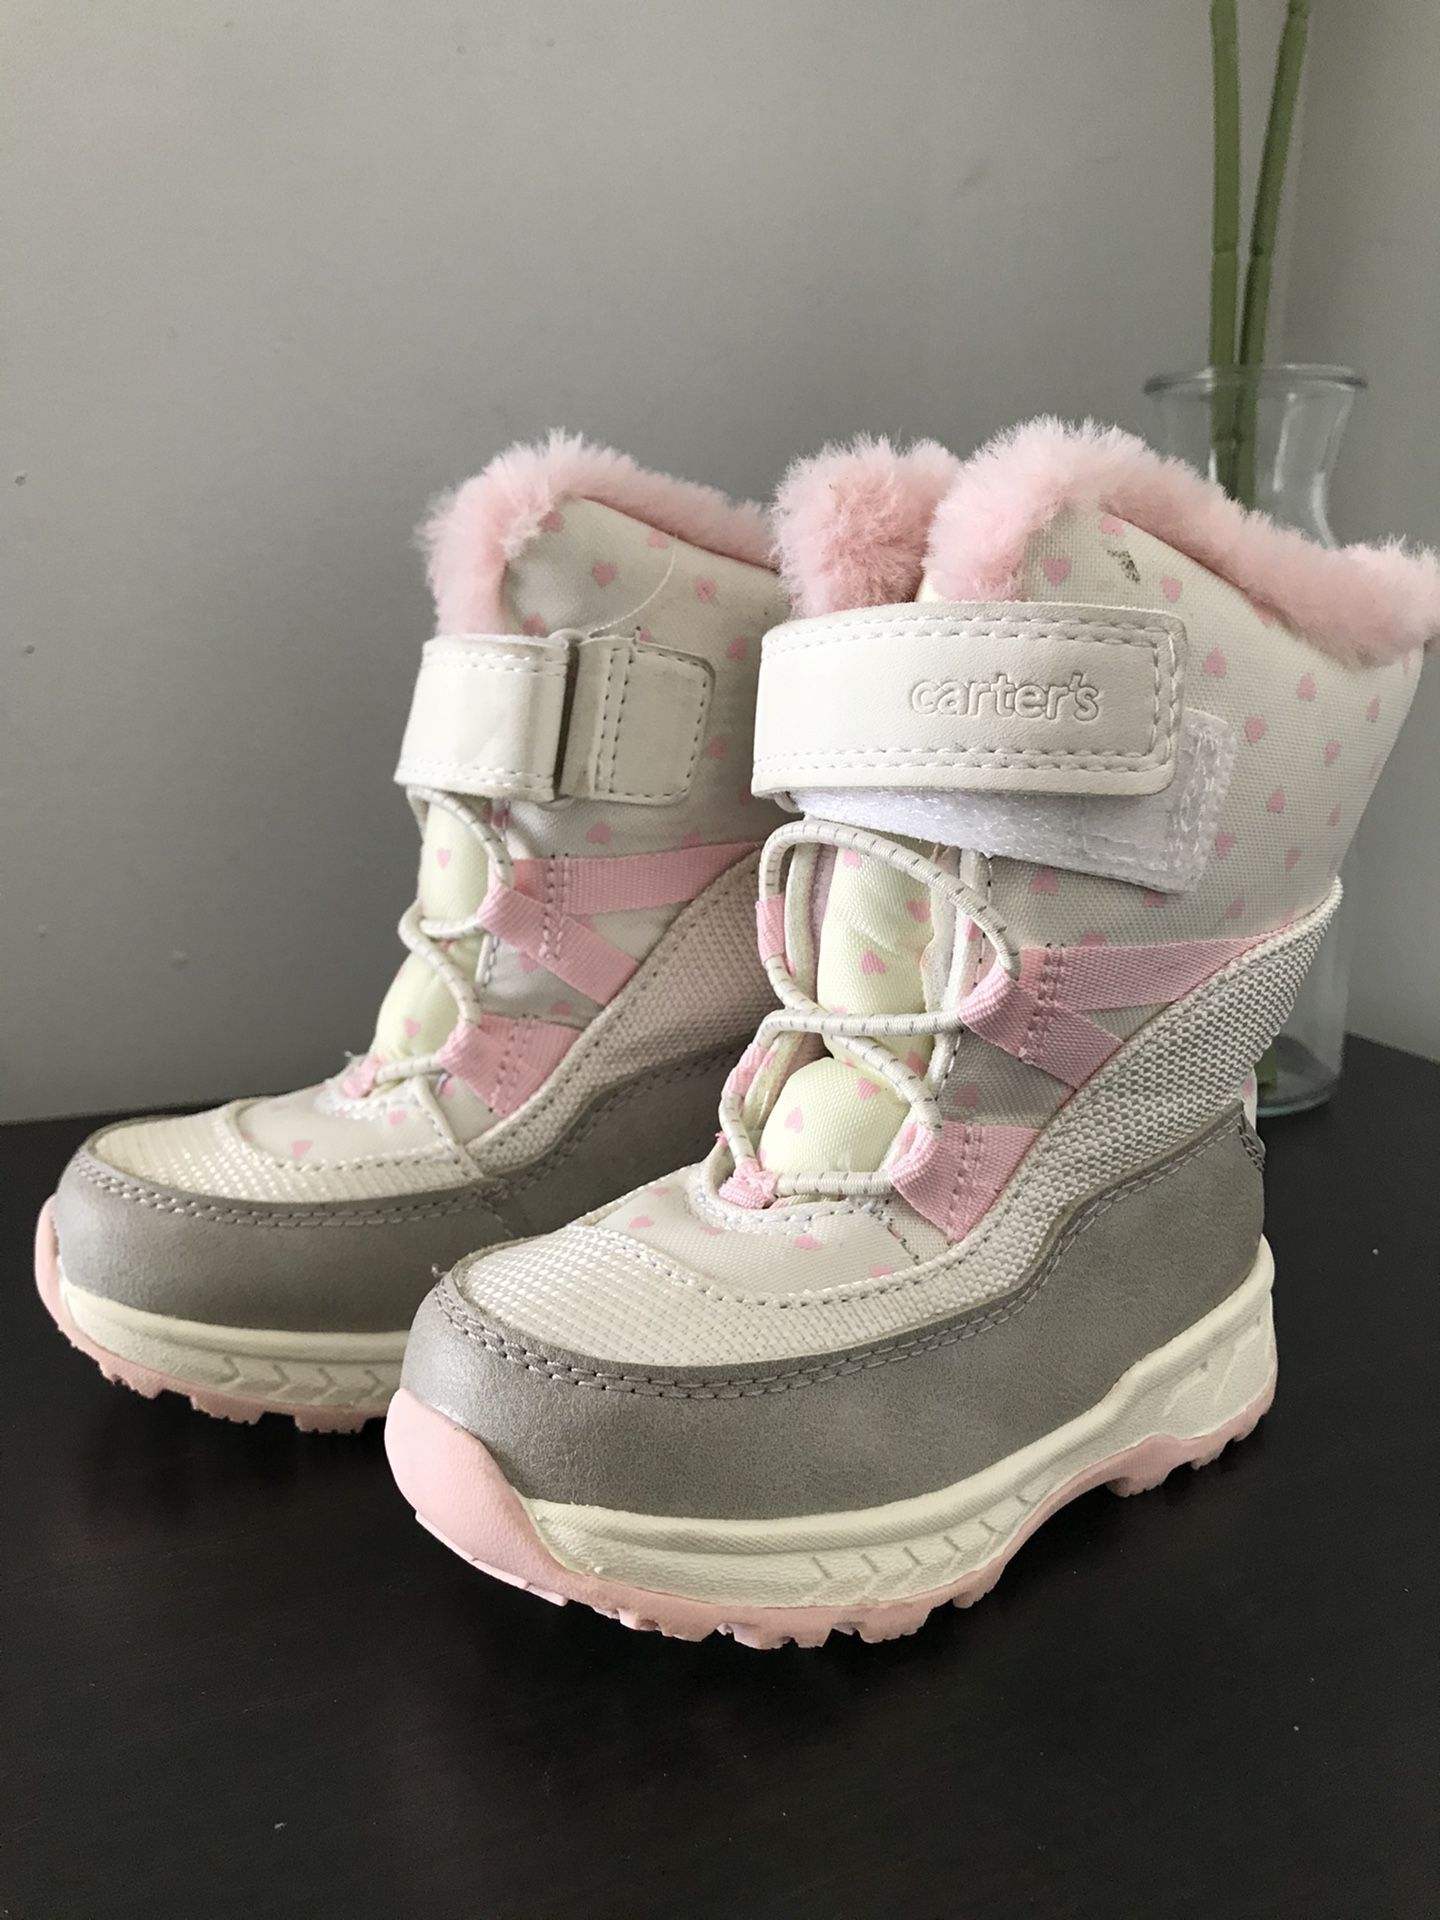 Carters Toddler Snow Boots - Size 7